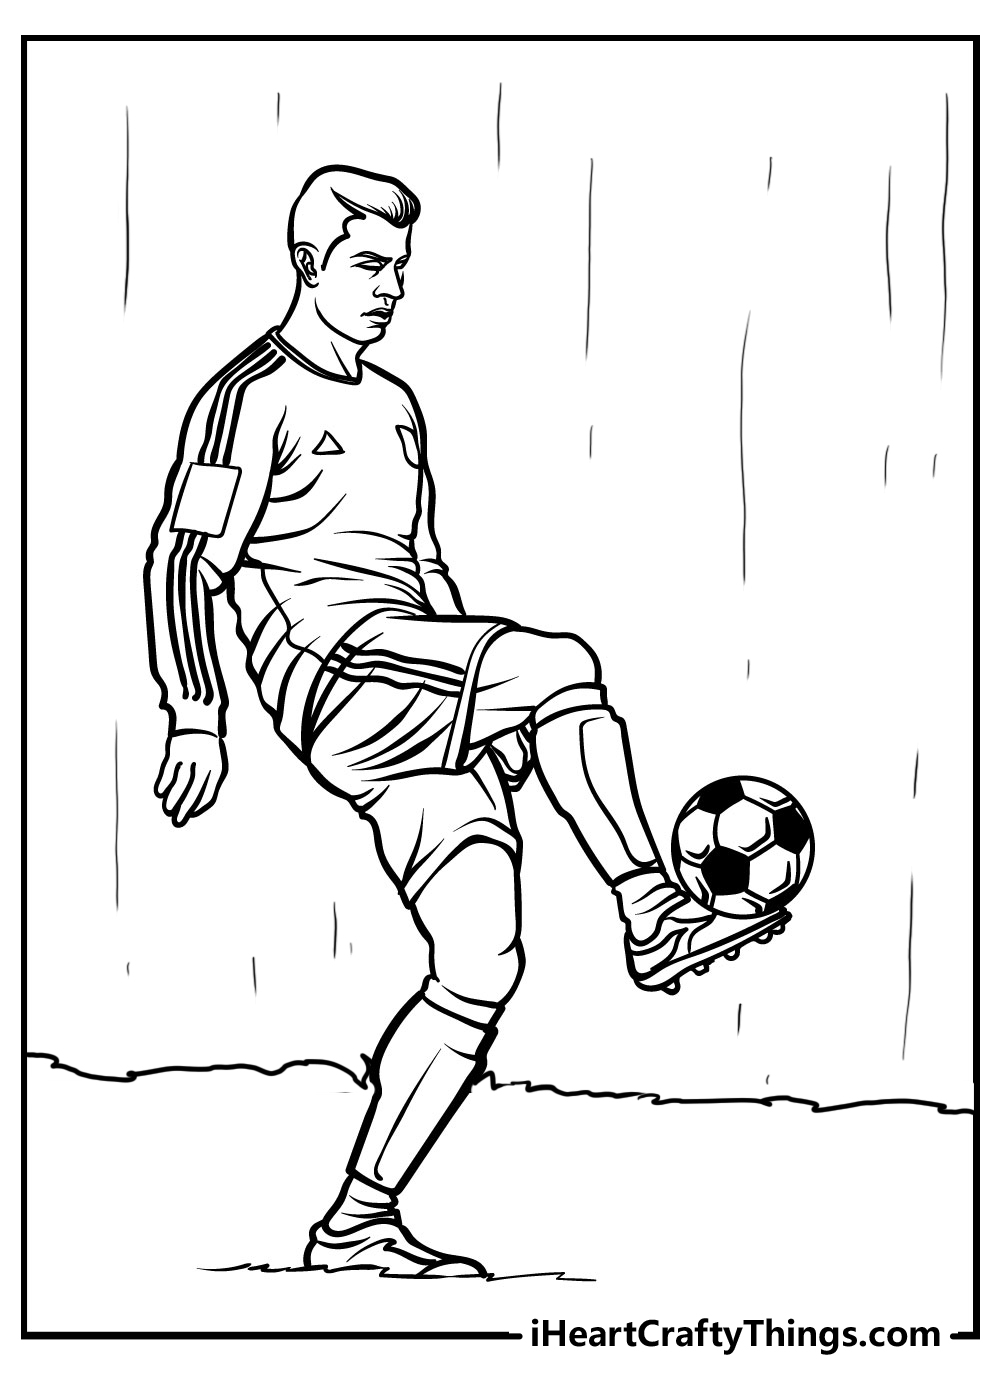 Football Coloring Pages Updated 20